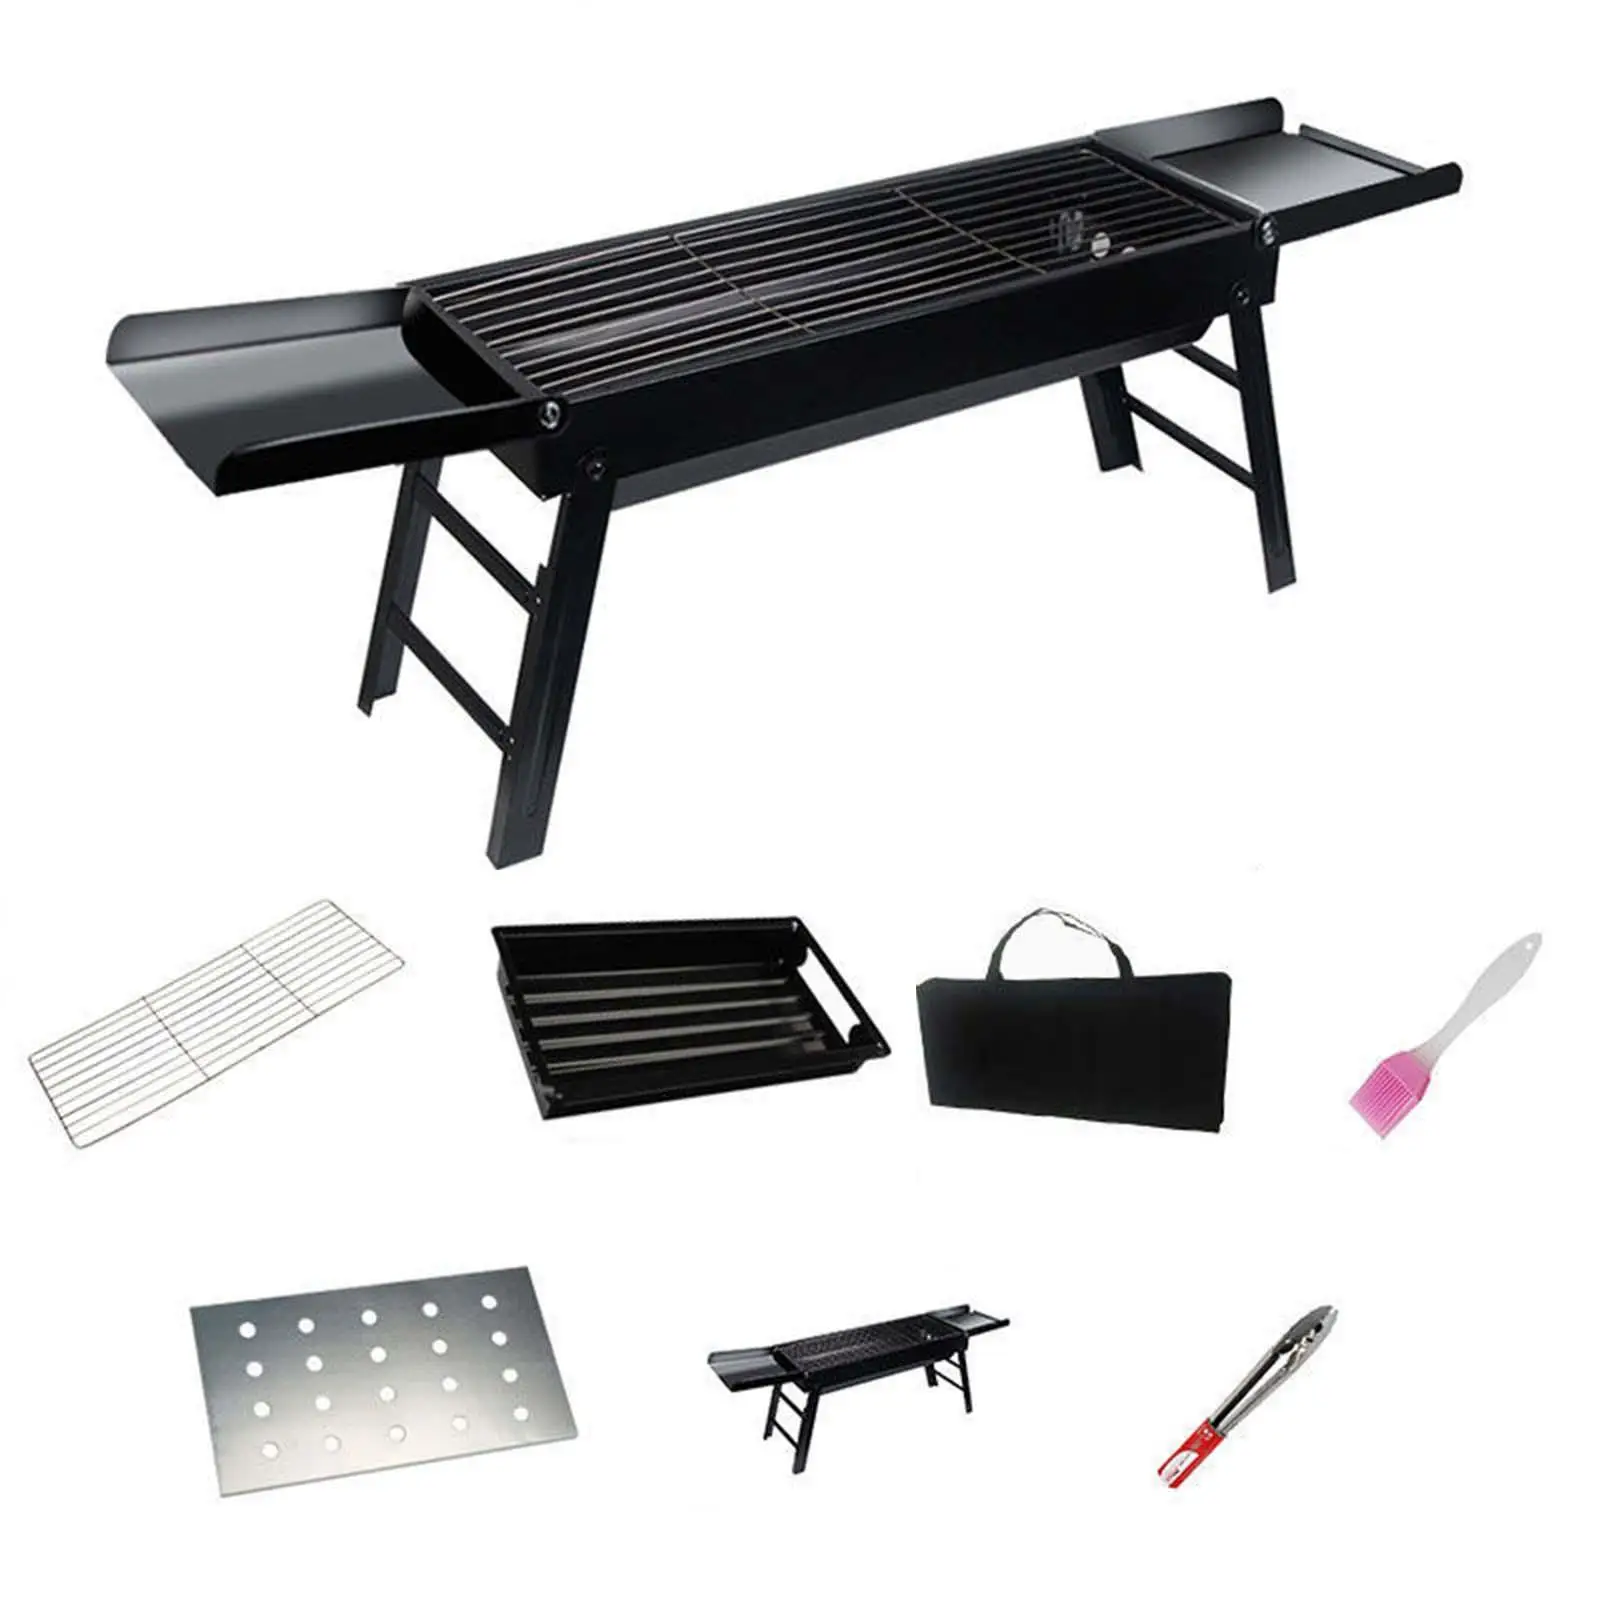 Outdoor Barbecue Grill, Barbecue  Grill, Folding Heavy Duty Smokers Grill BBQ